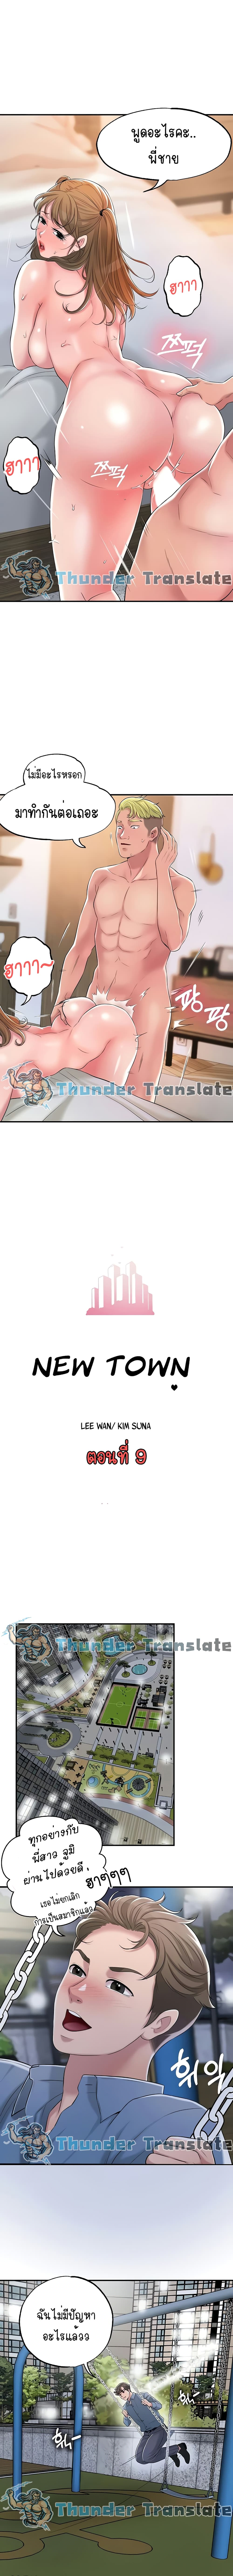 New Town 9 09